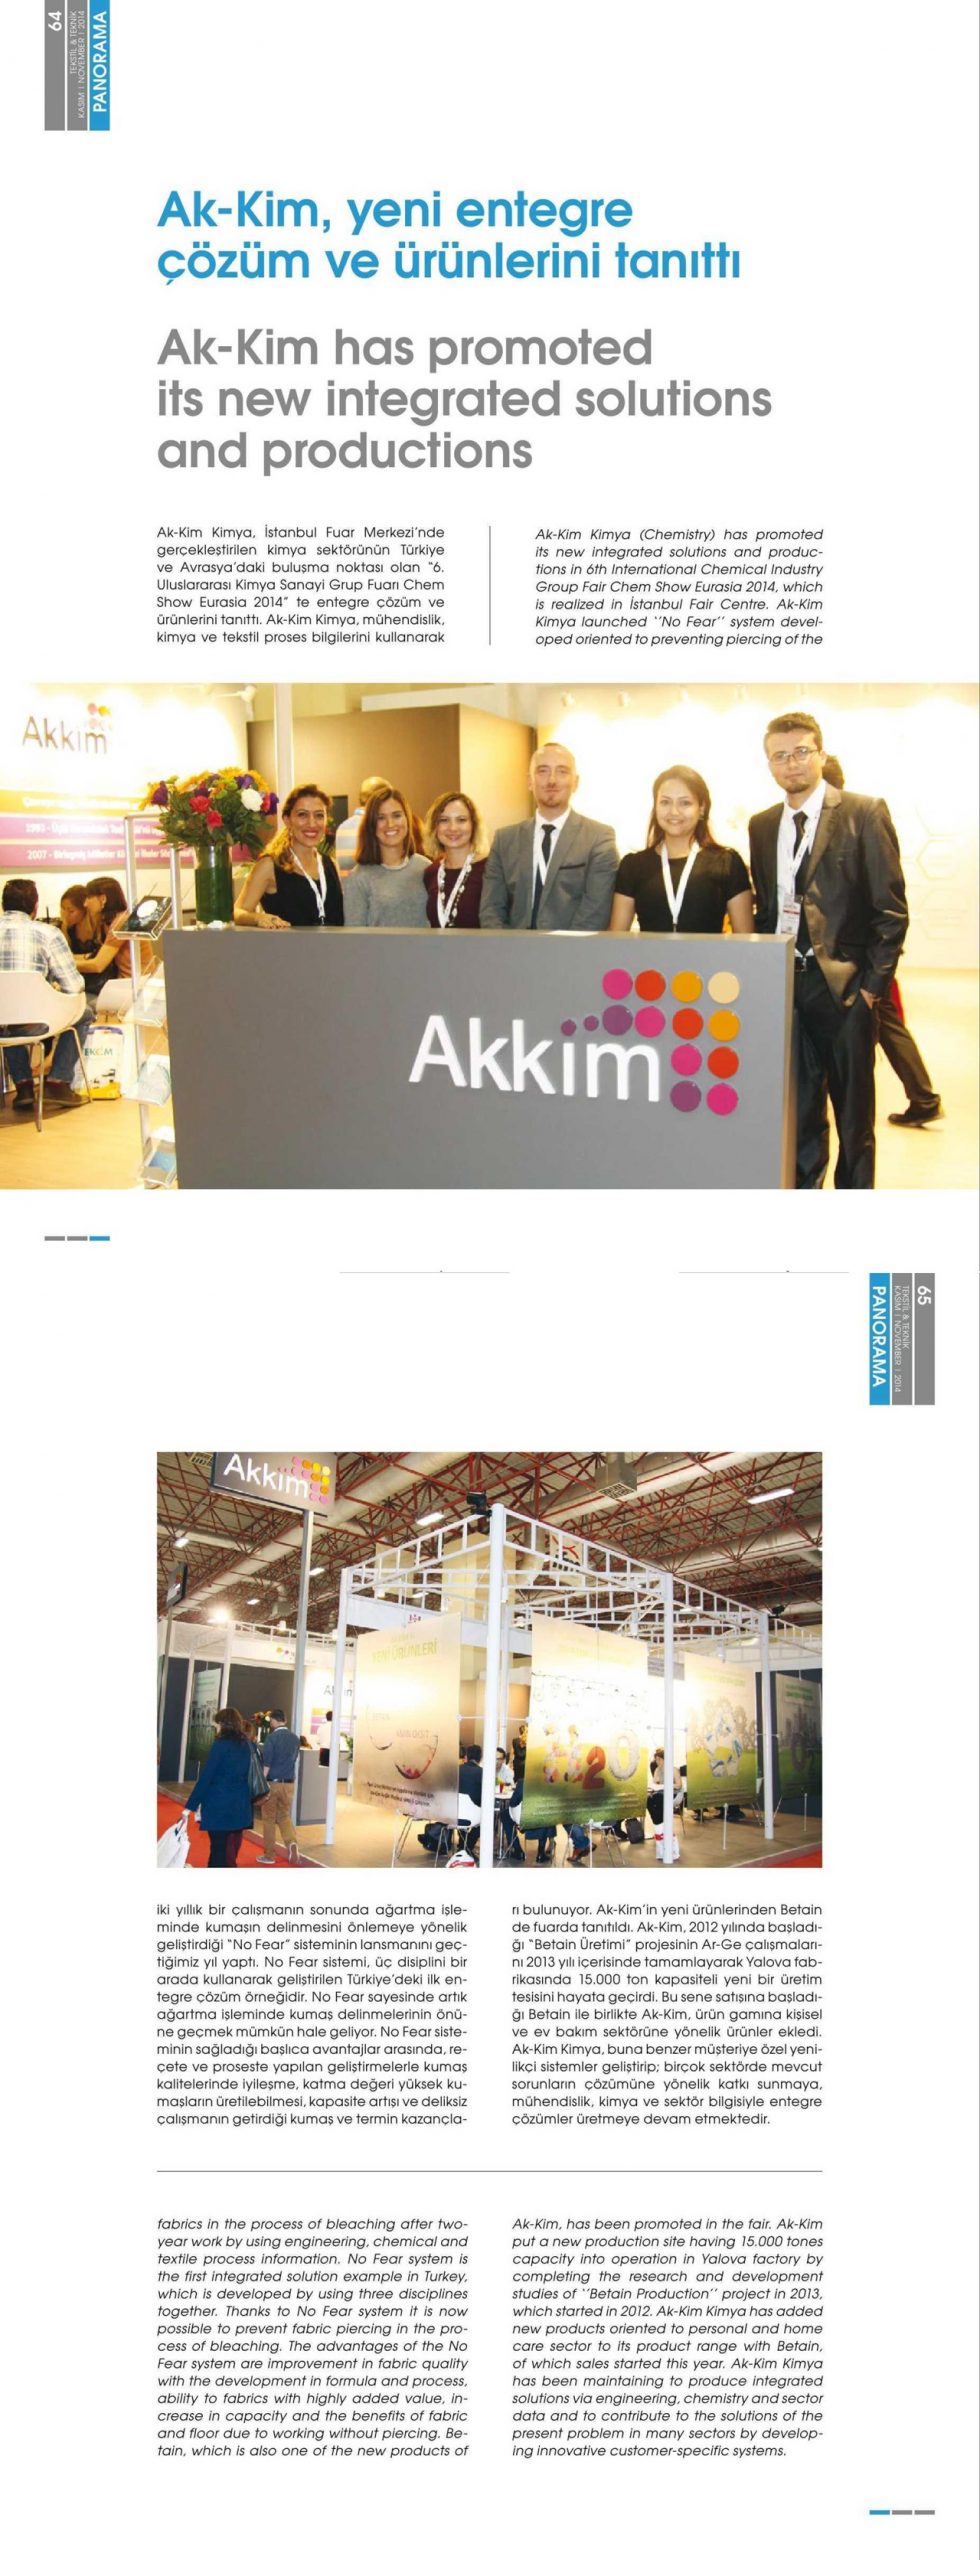 Akkim has promoted its new integrated solutions and productions / Tekstil Teknik / November 2014